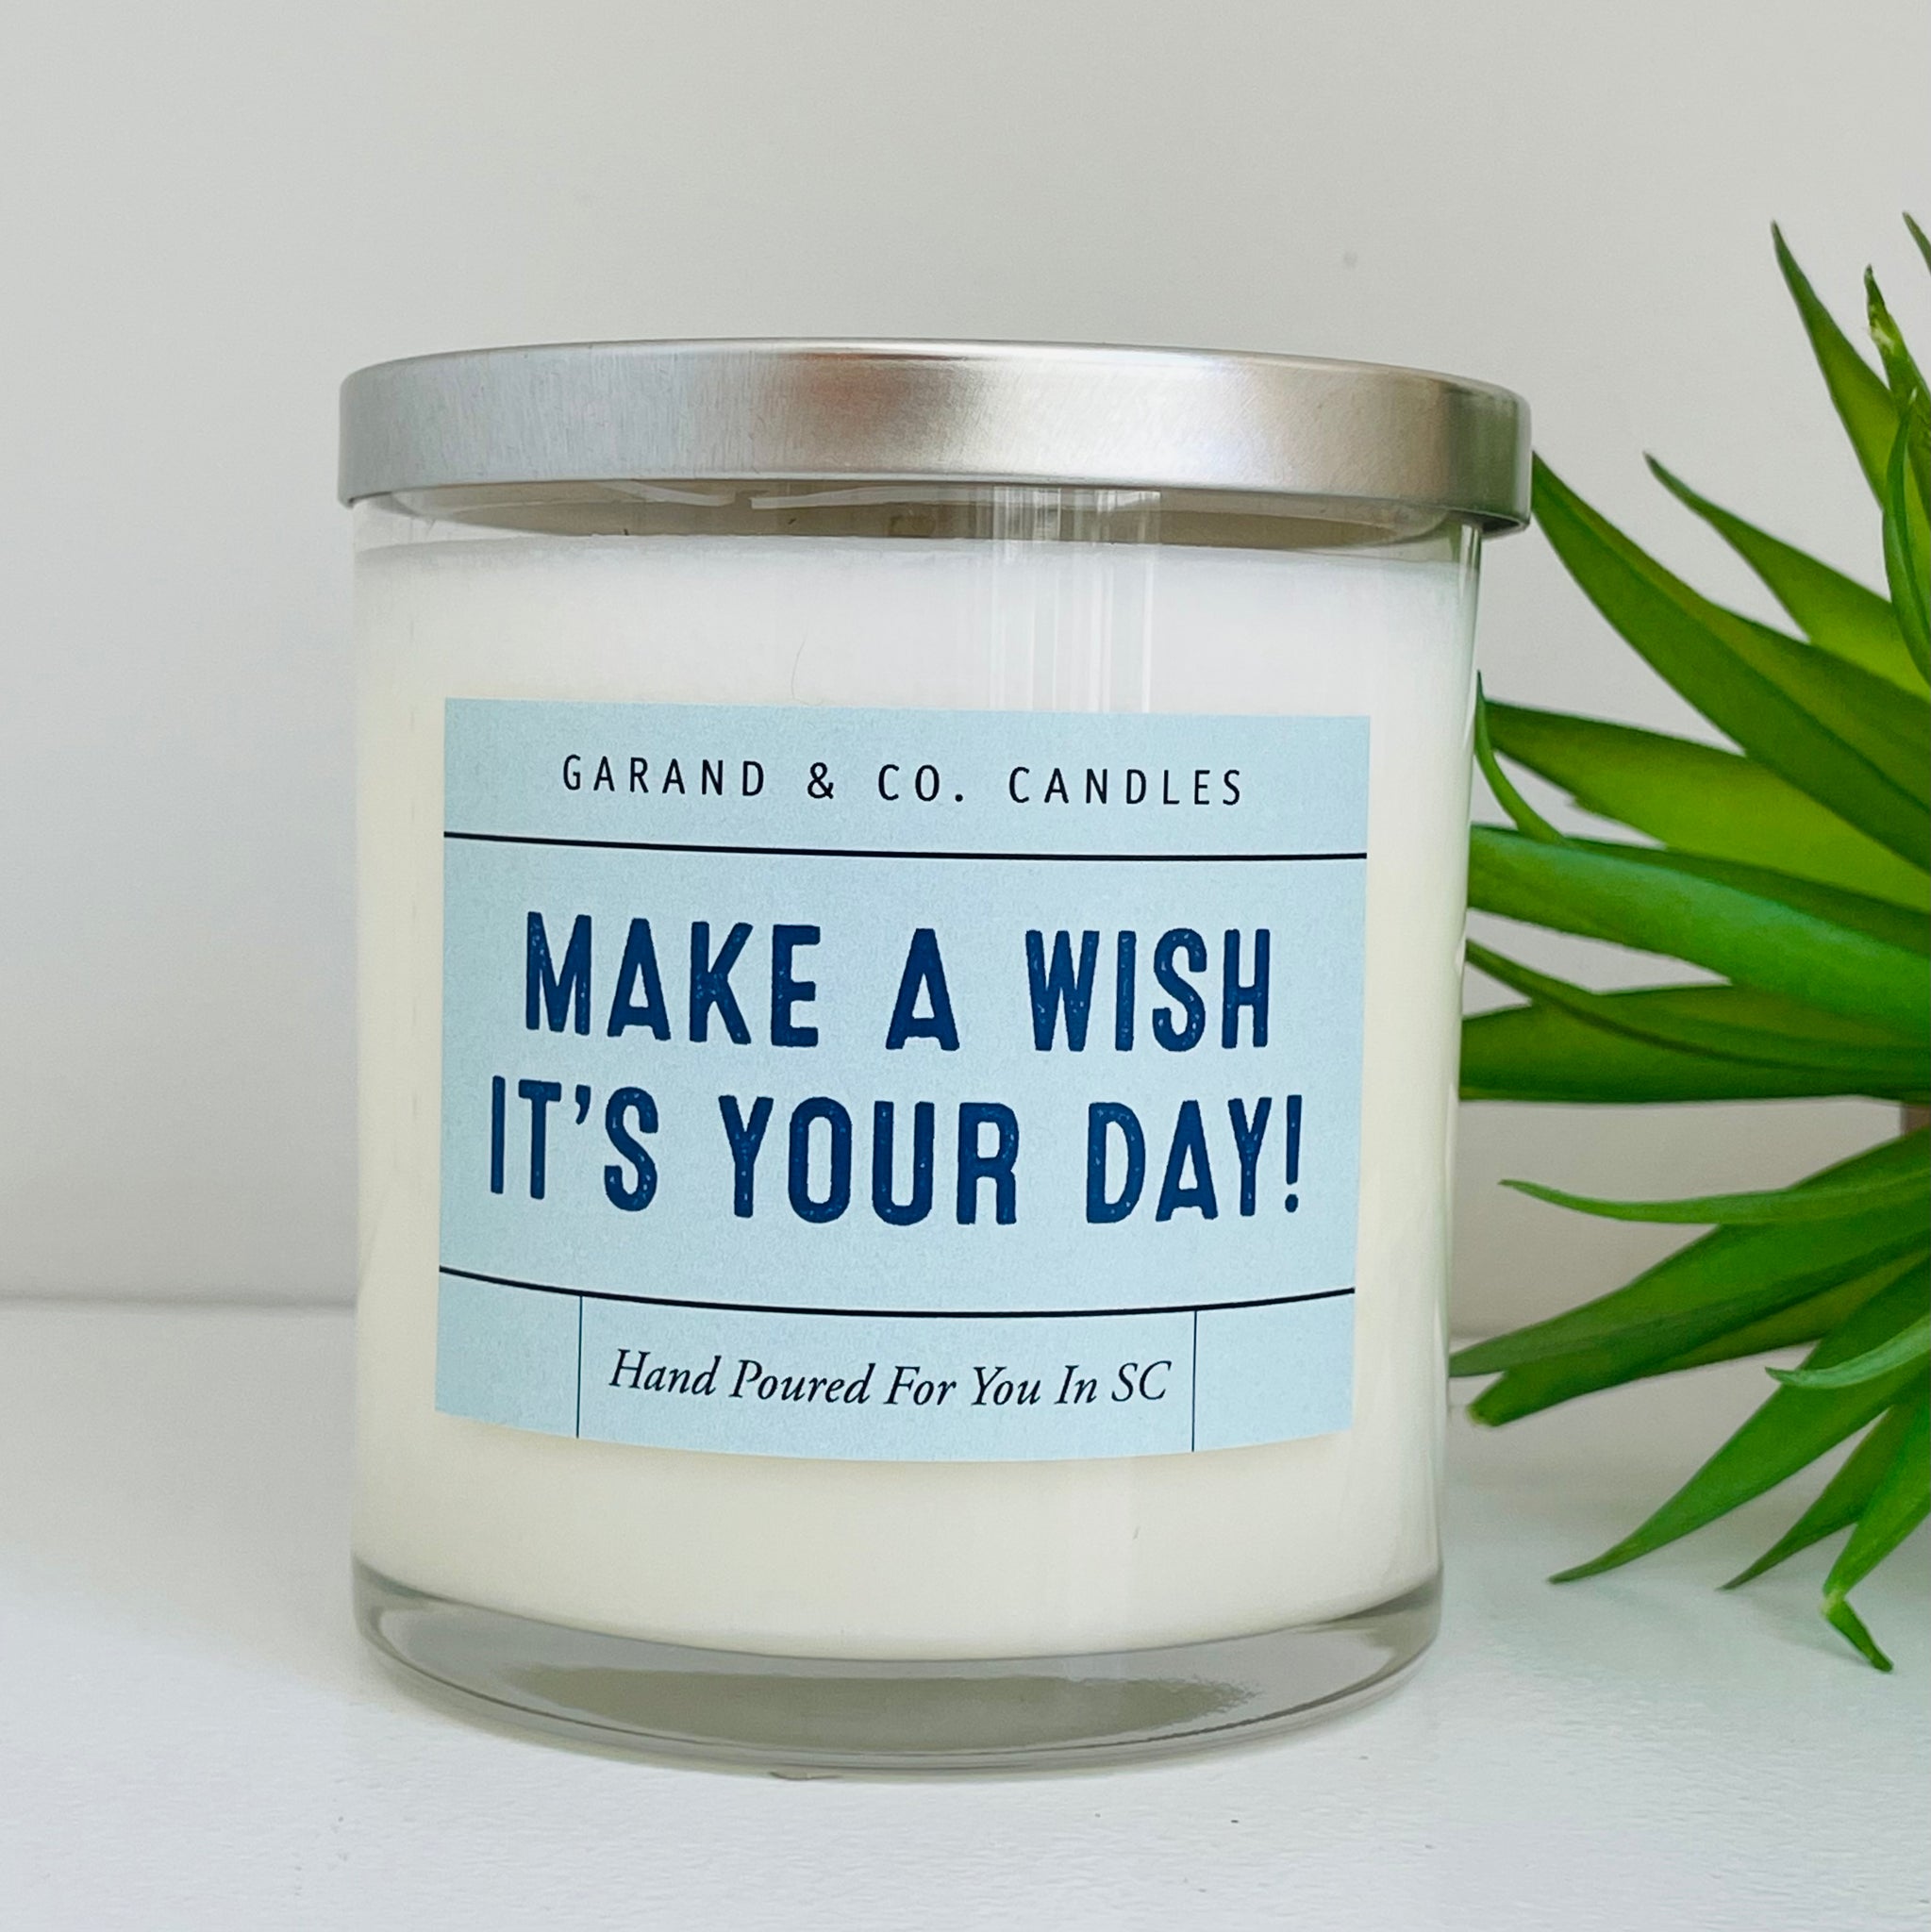 12 oz Clear Glass Jar Candle - Make A Wish It’s Your Day!